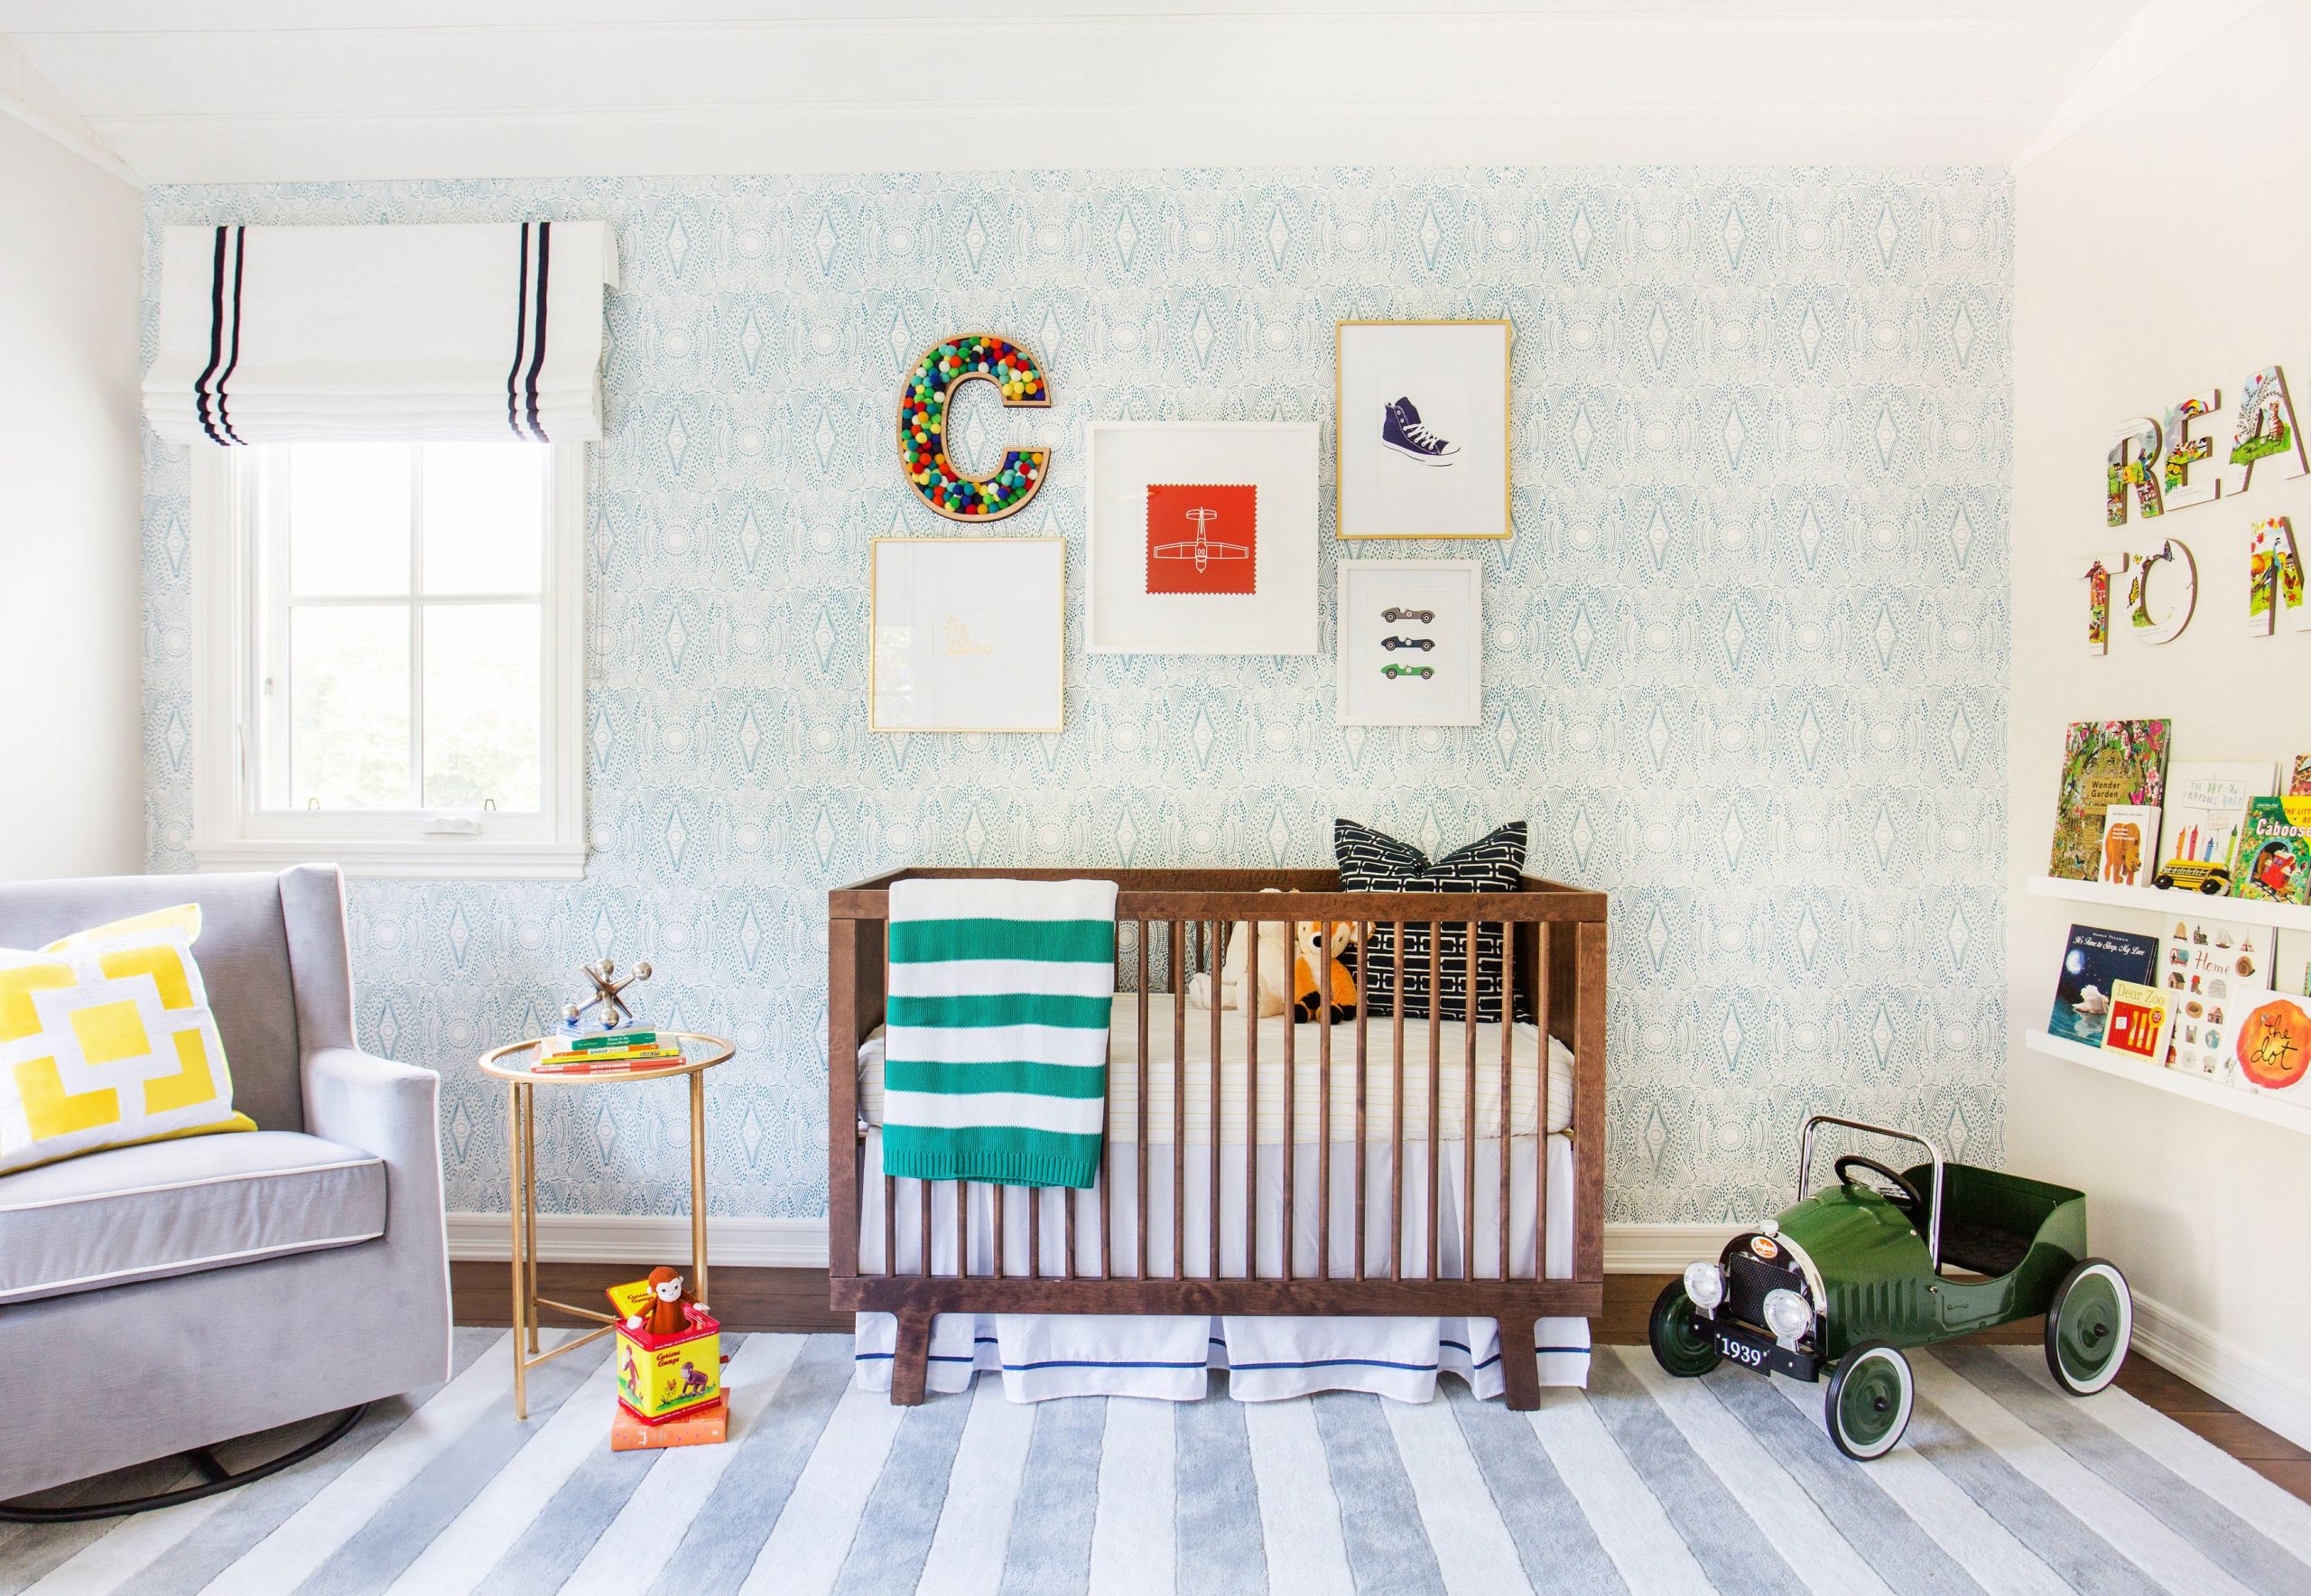 Baby Room Wall Decor Ideas
 3 Wall Decor Ideas Perfect for Kids’ Rooms s